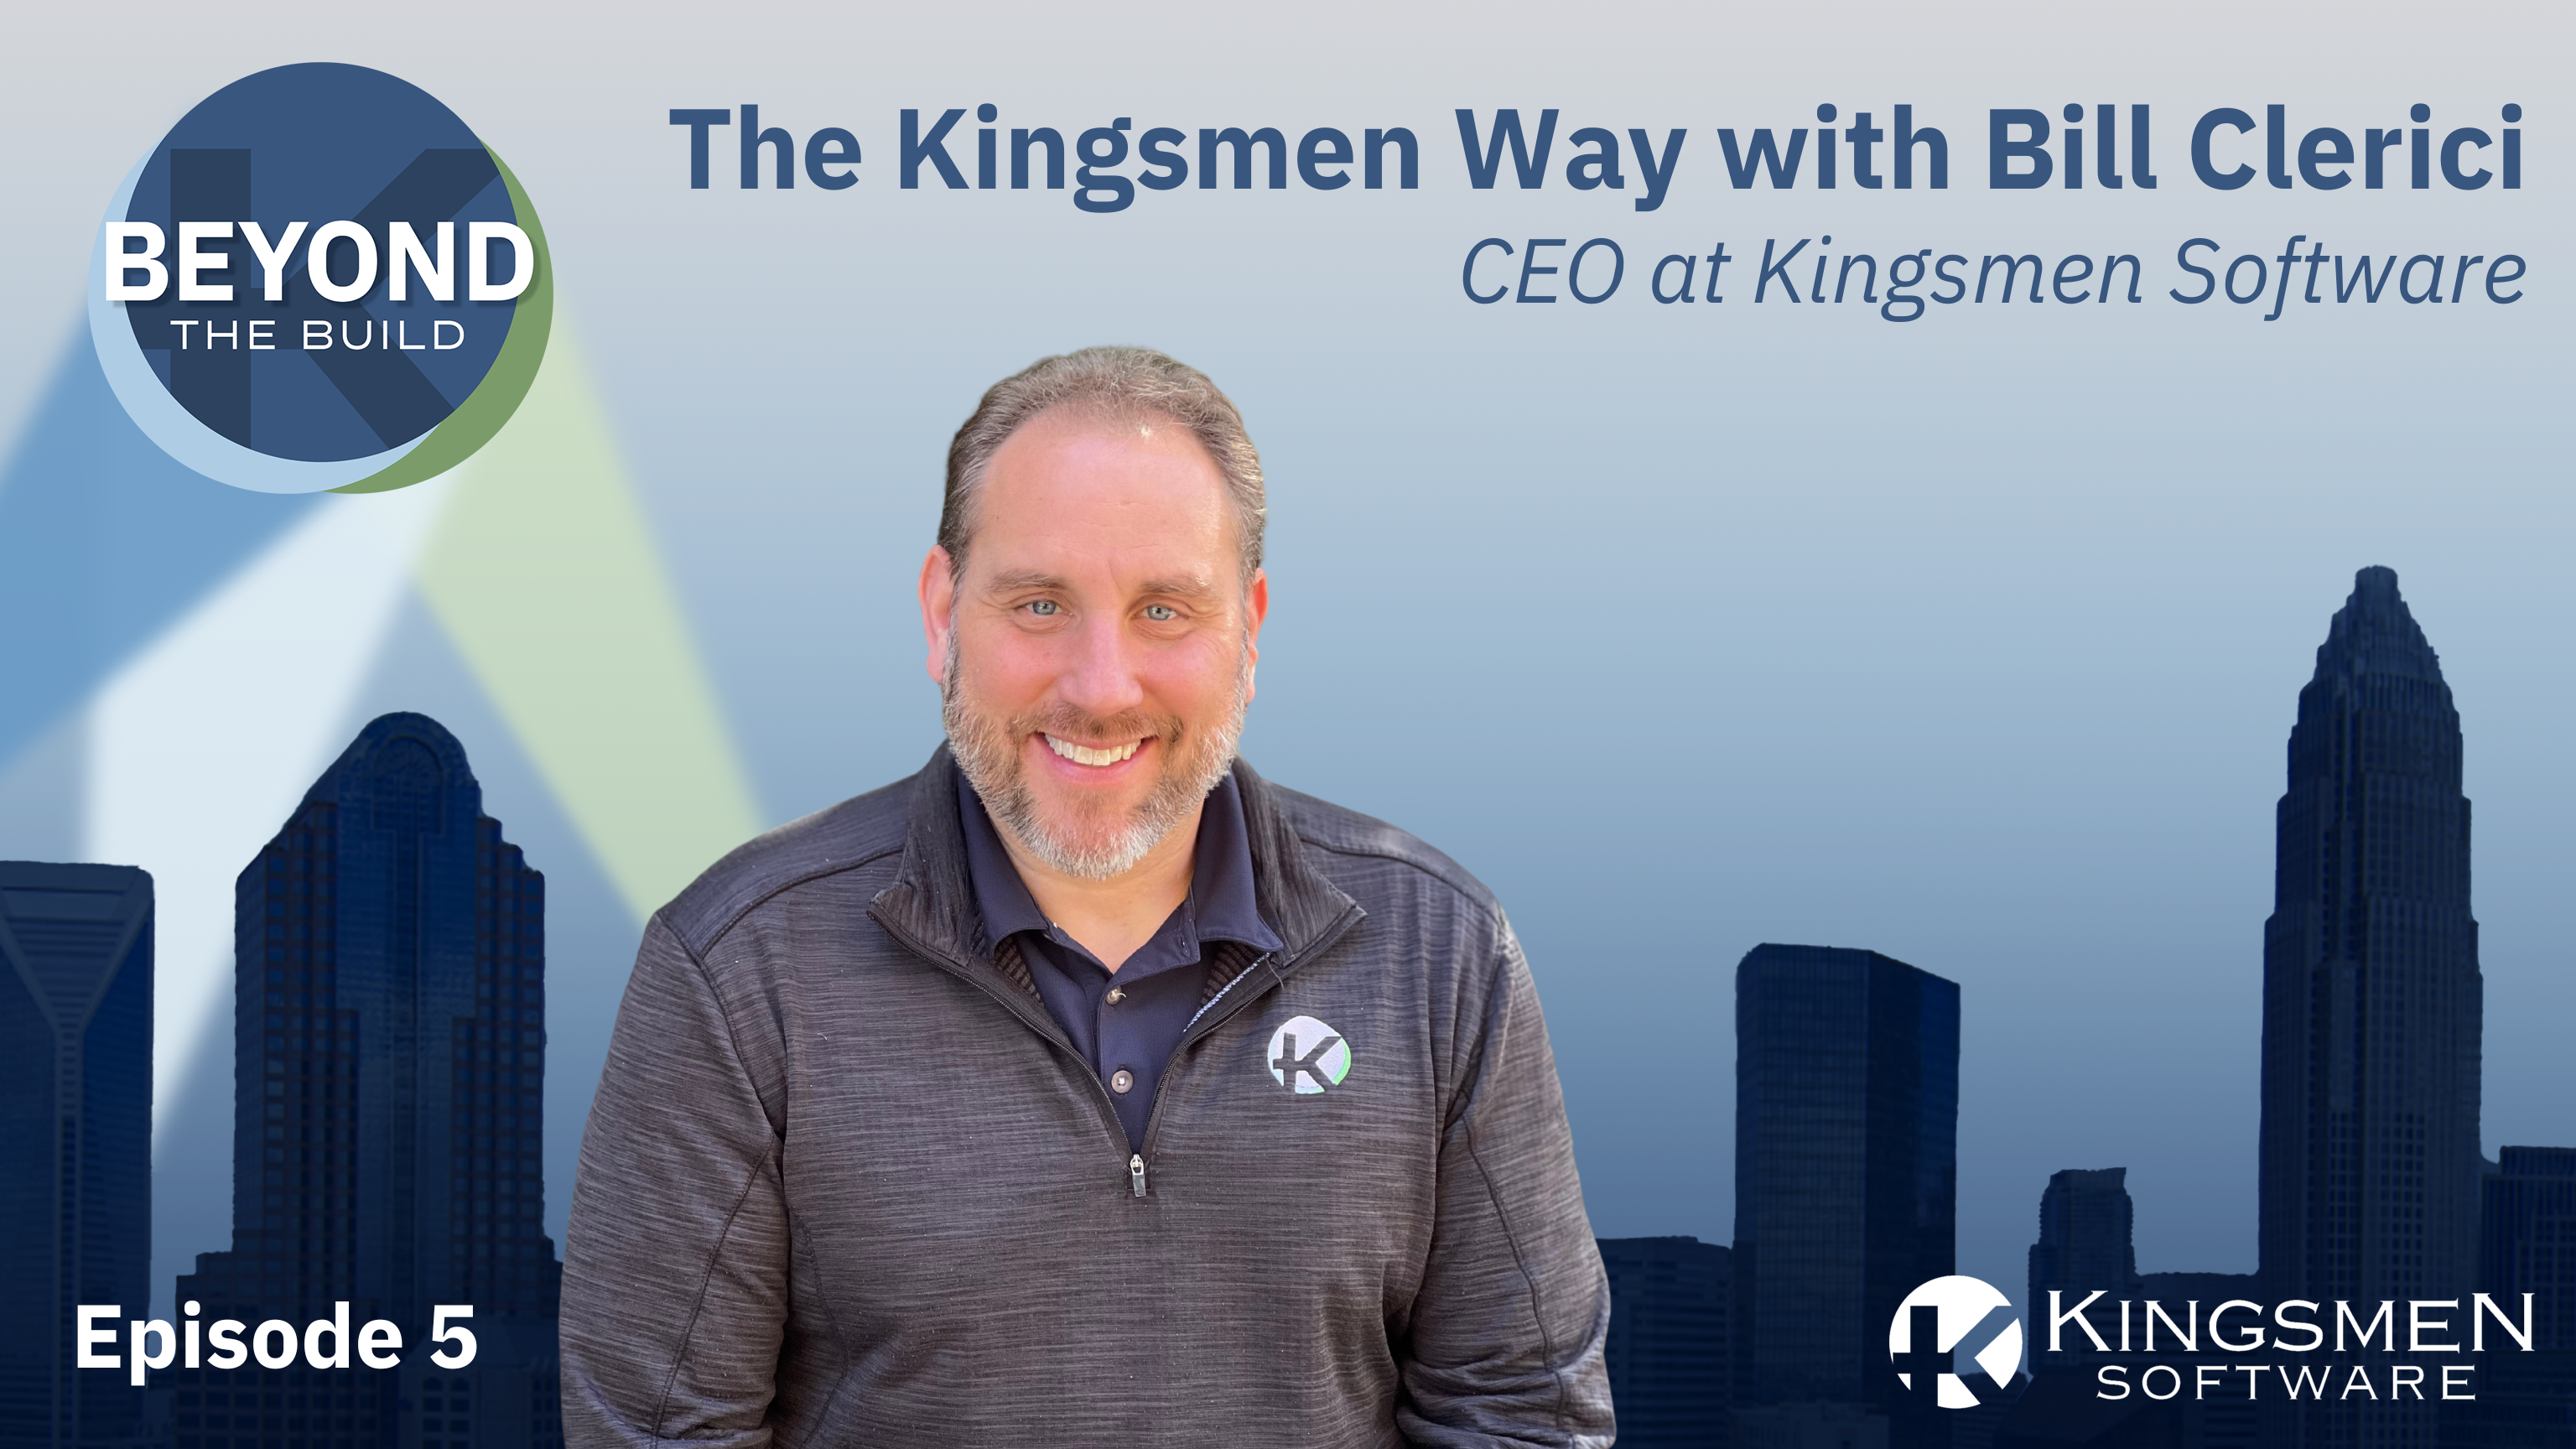 Episode 5: The Kingsmen Way with Bill Clerici